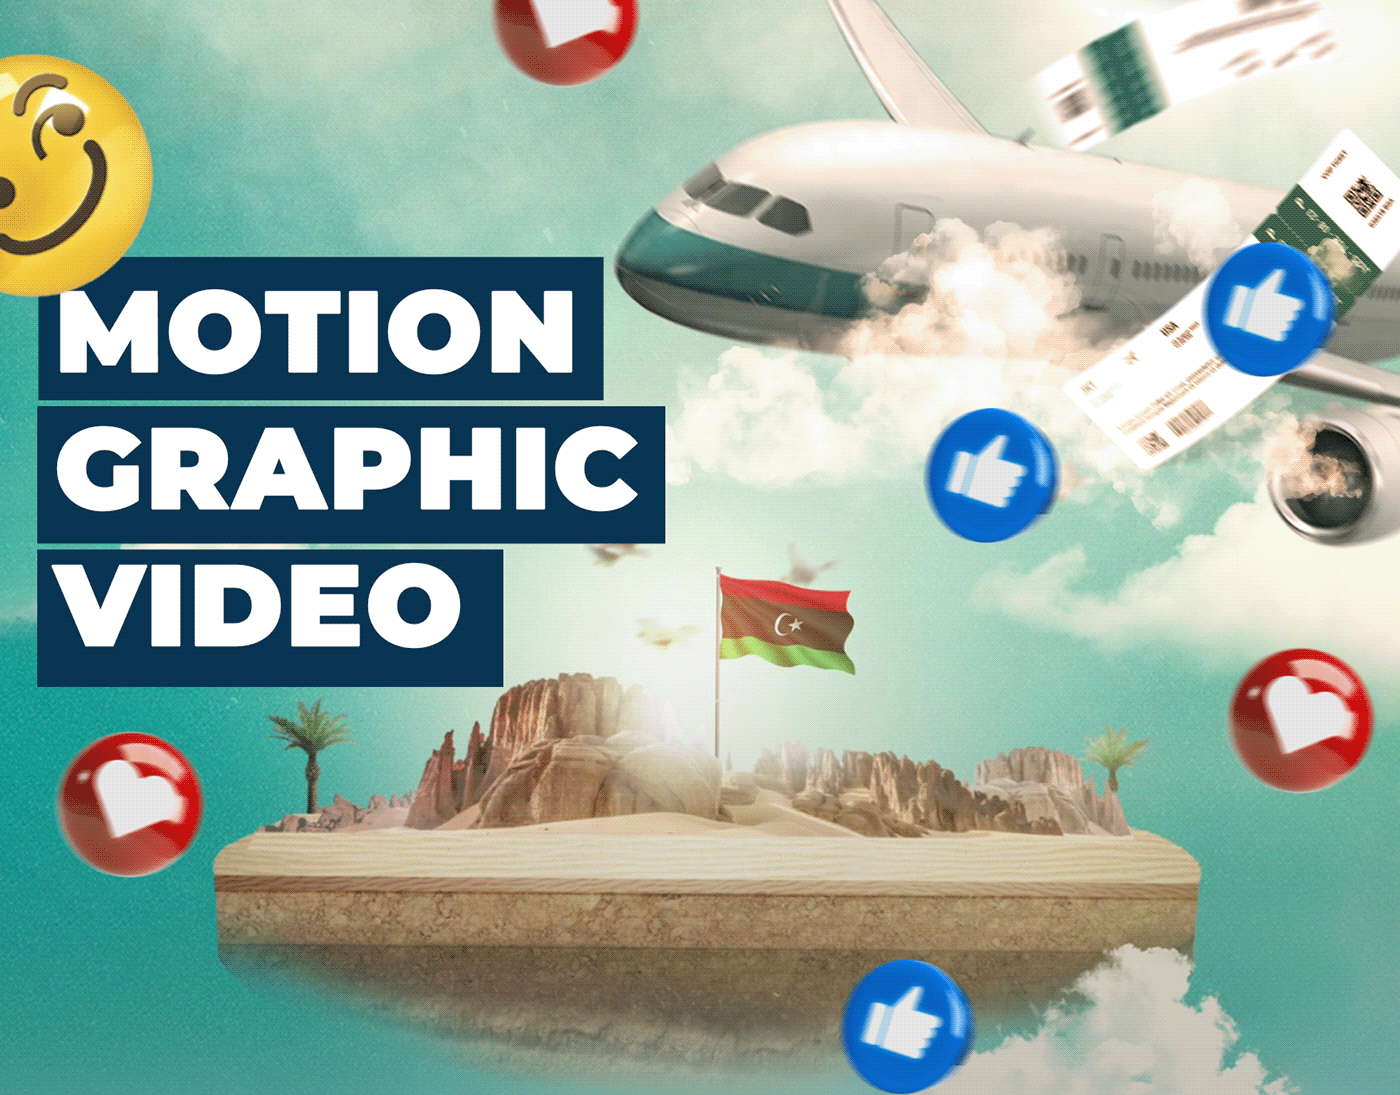 motion graphics  after effects animation  motion design Advertising  Travel travel agency tourism Social media post tourist